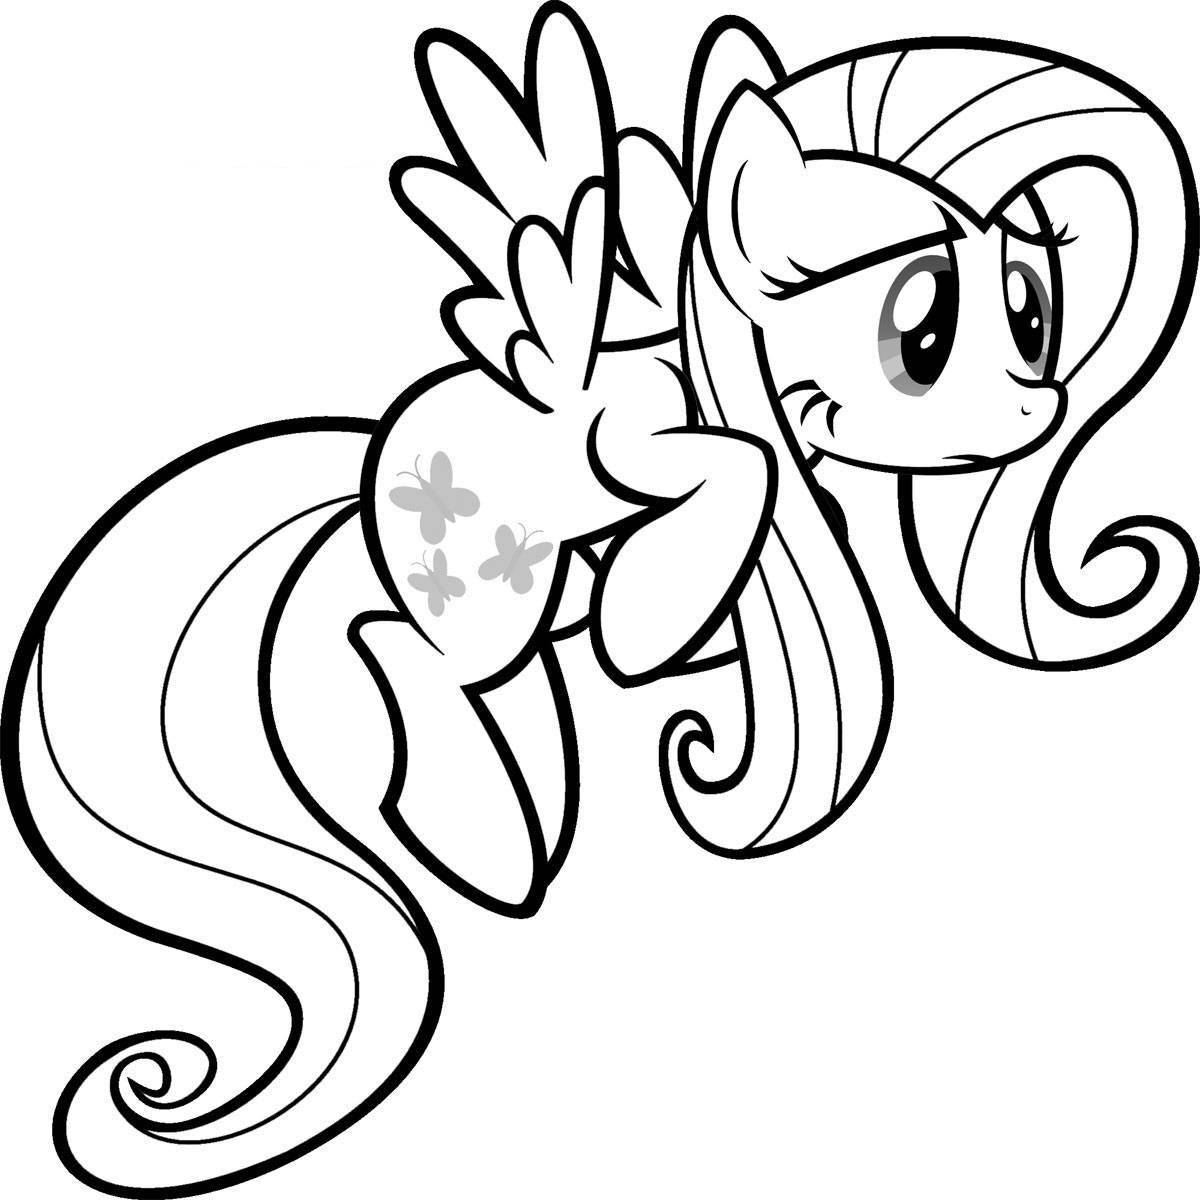 Adorable fluttershy pony coloring book